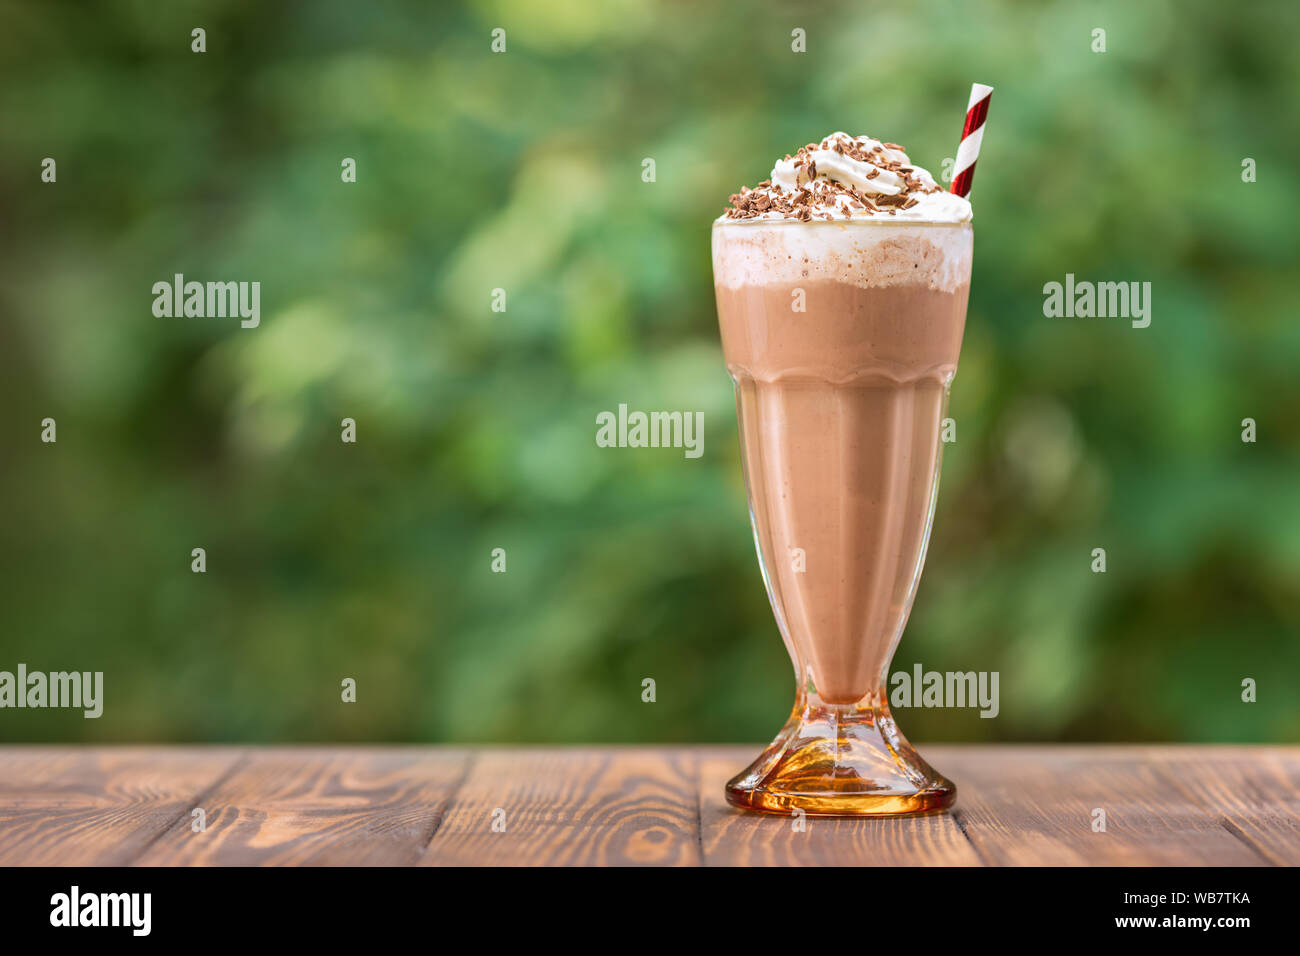 chocolate milkshake in glass with whipped cream on wooden table outdoors Stock Photo